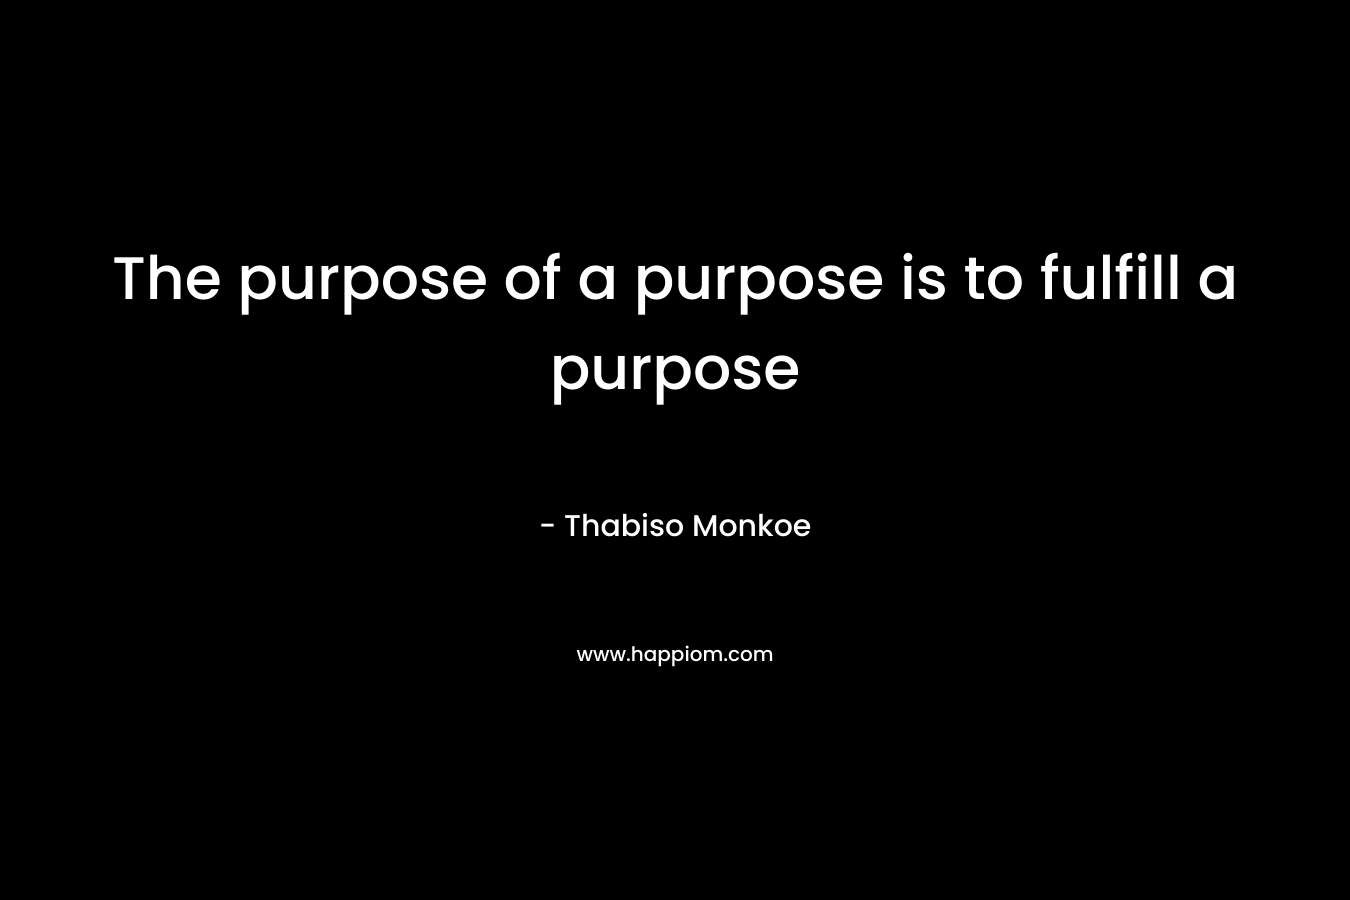 The purpose of a purpose is to fulfill a purpose